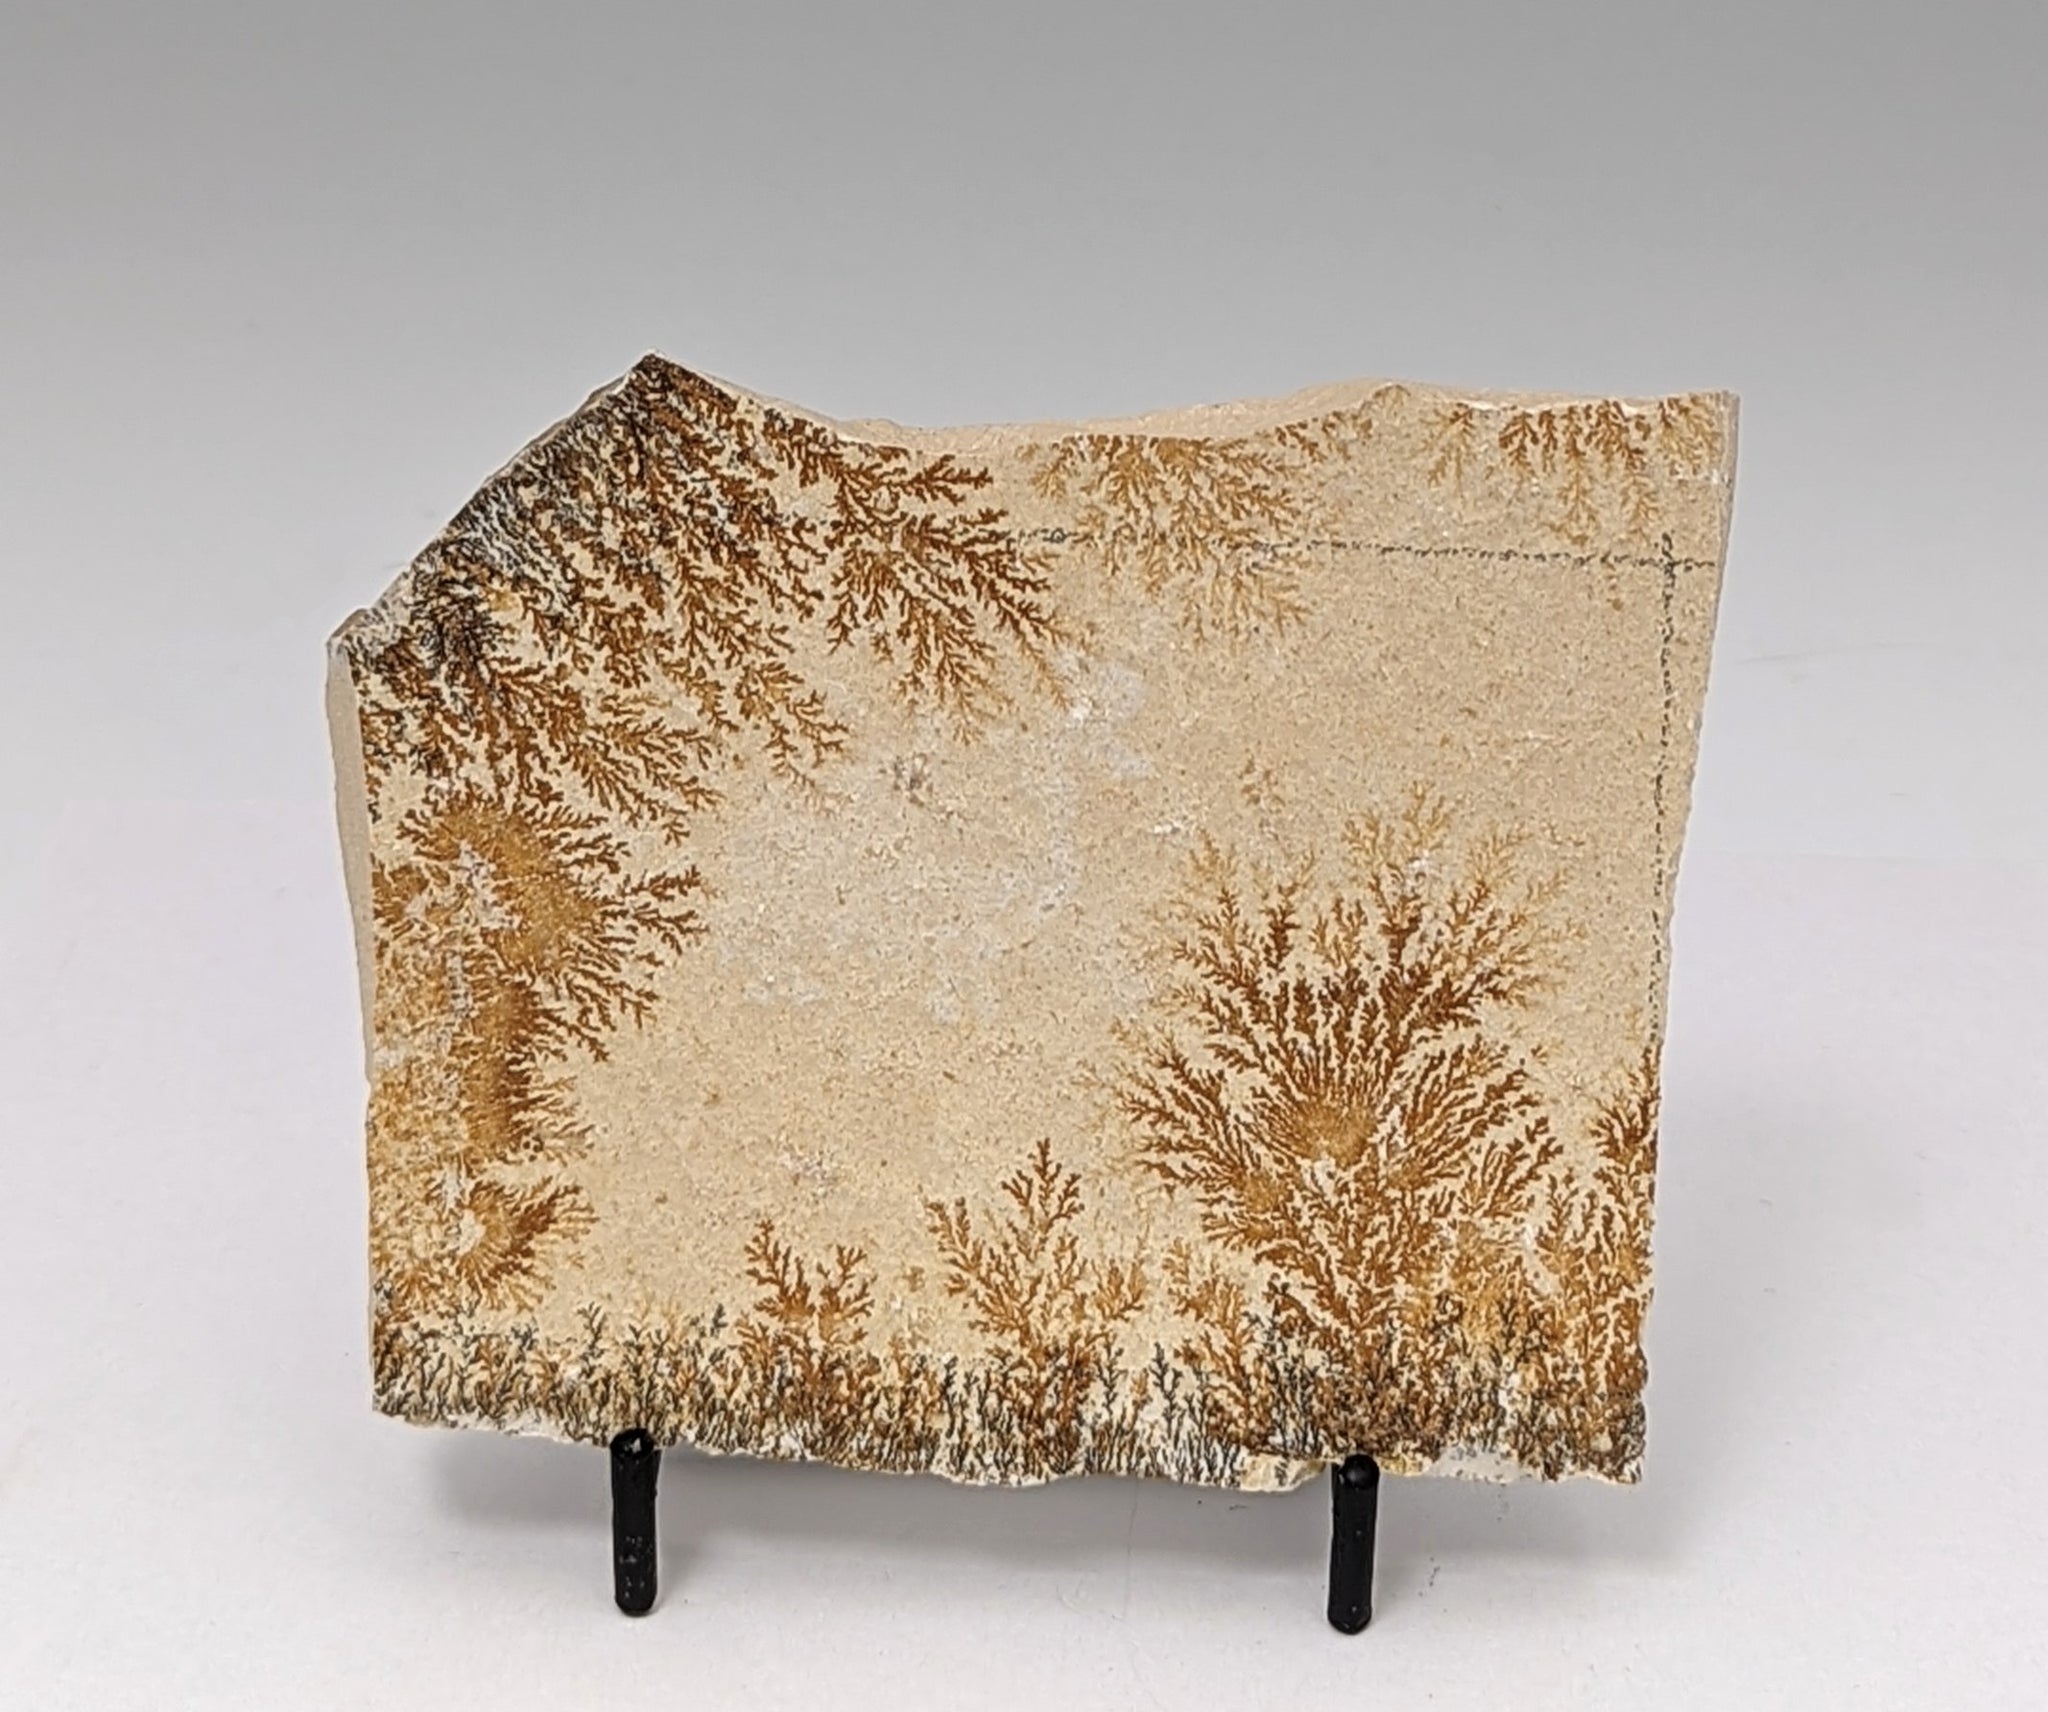 Dendritic Fossil Slab with Manganese